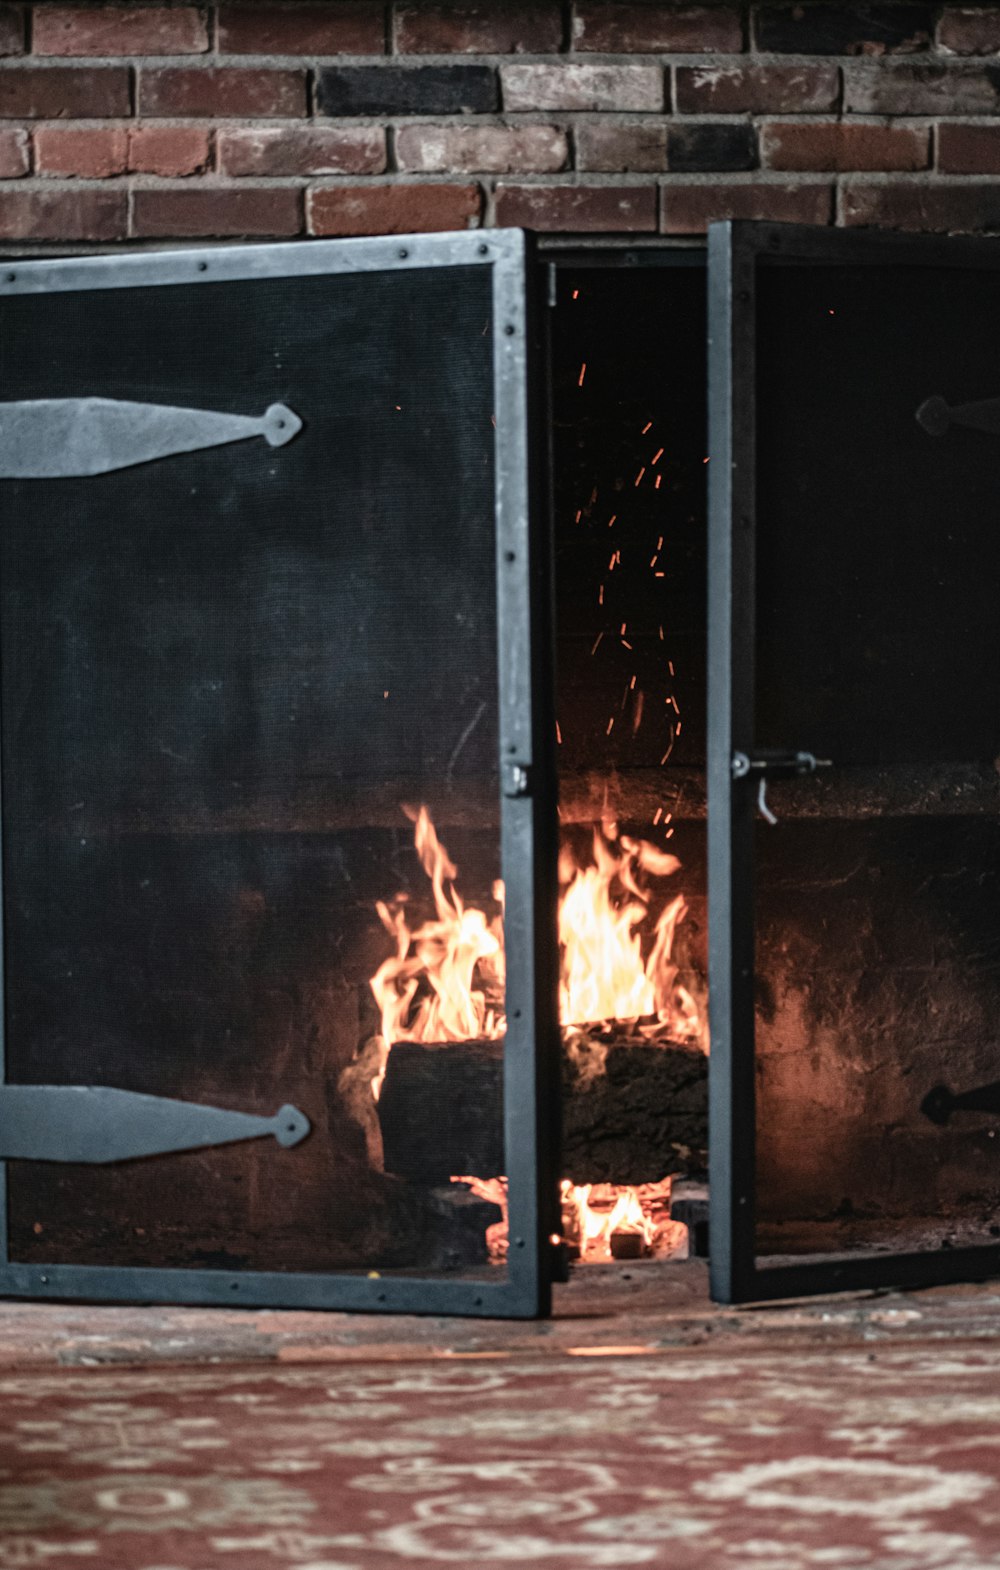 a fire burning inside of a metal oven